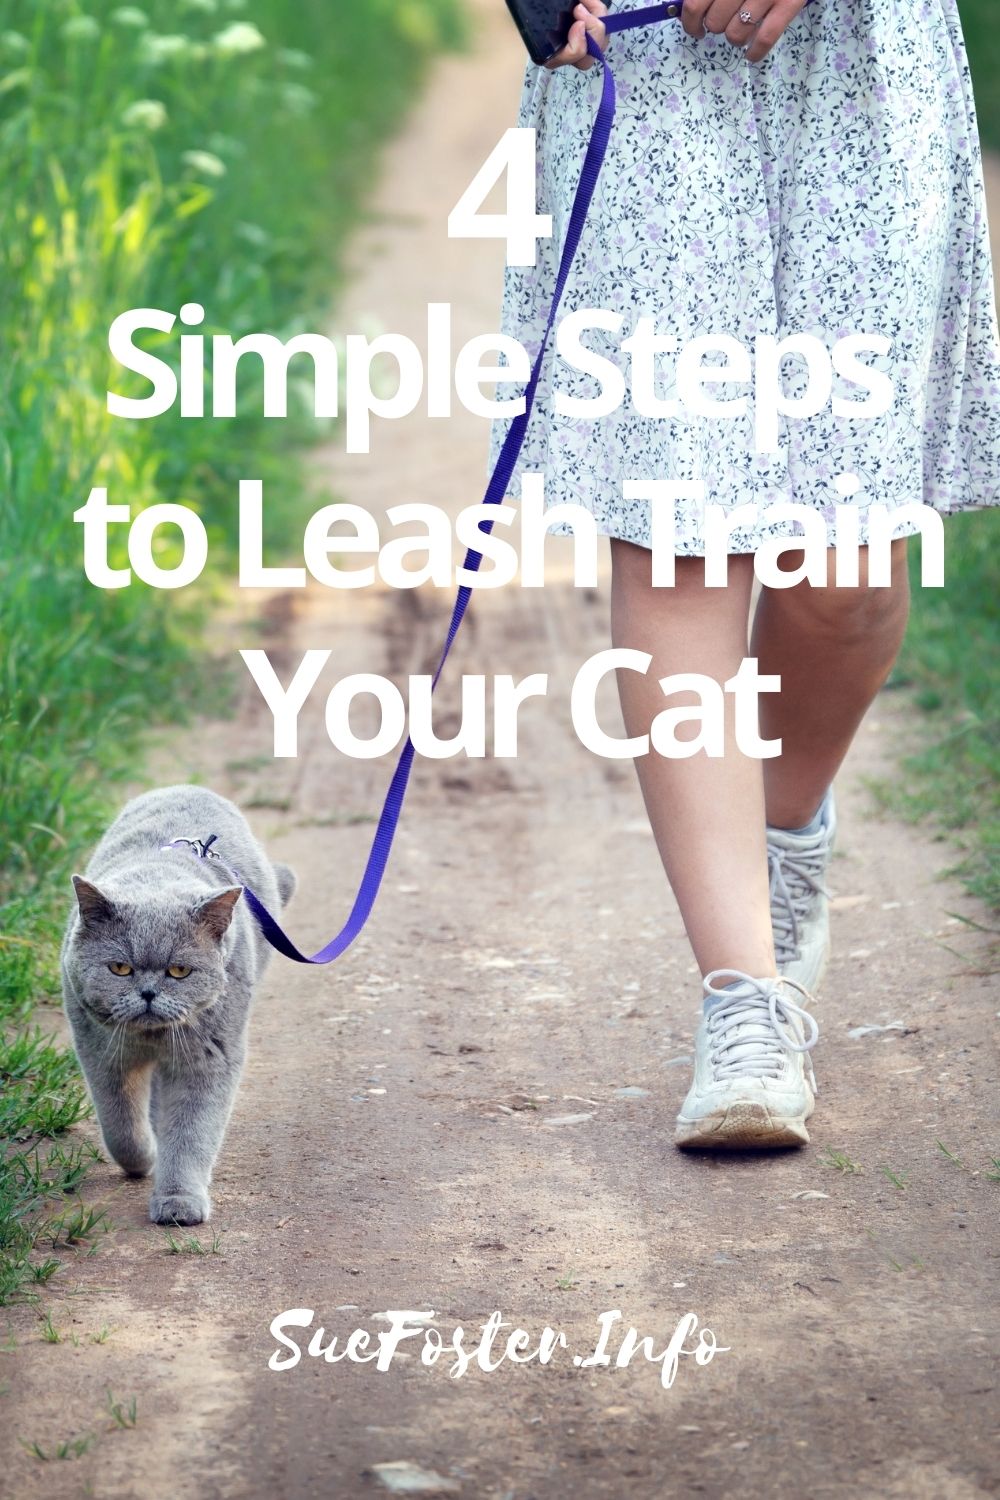 Have you ever wanted to take your cat outside to explore with you? If you're willing to be patient, introduce your cat slowly, and provide a lot of positive reinforcement, you can take them on walks with you in no time!